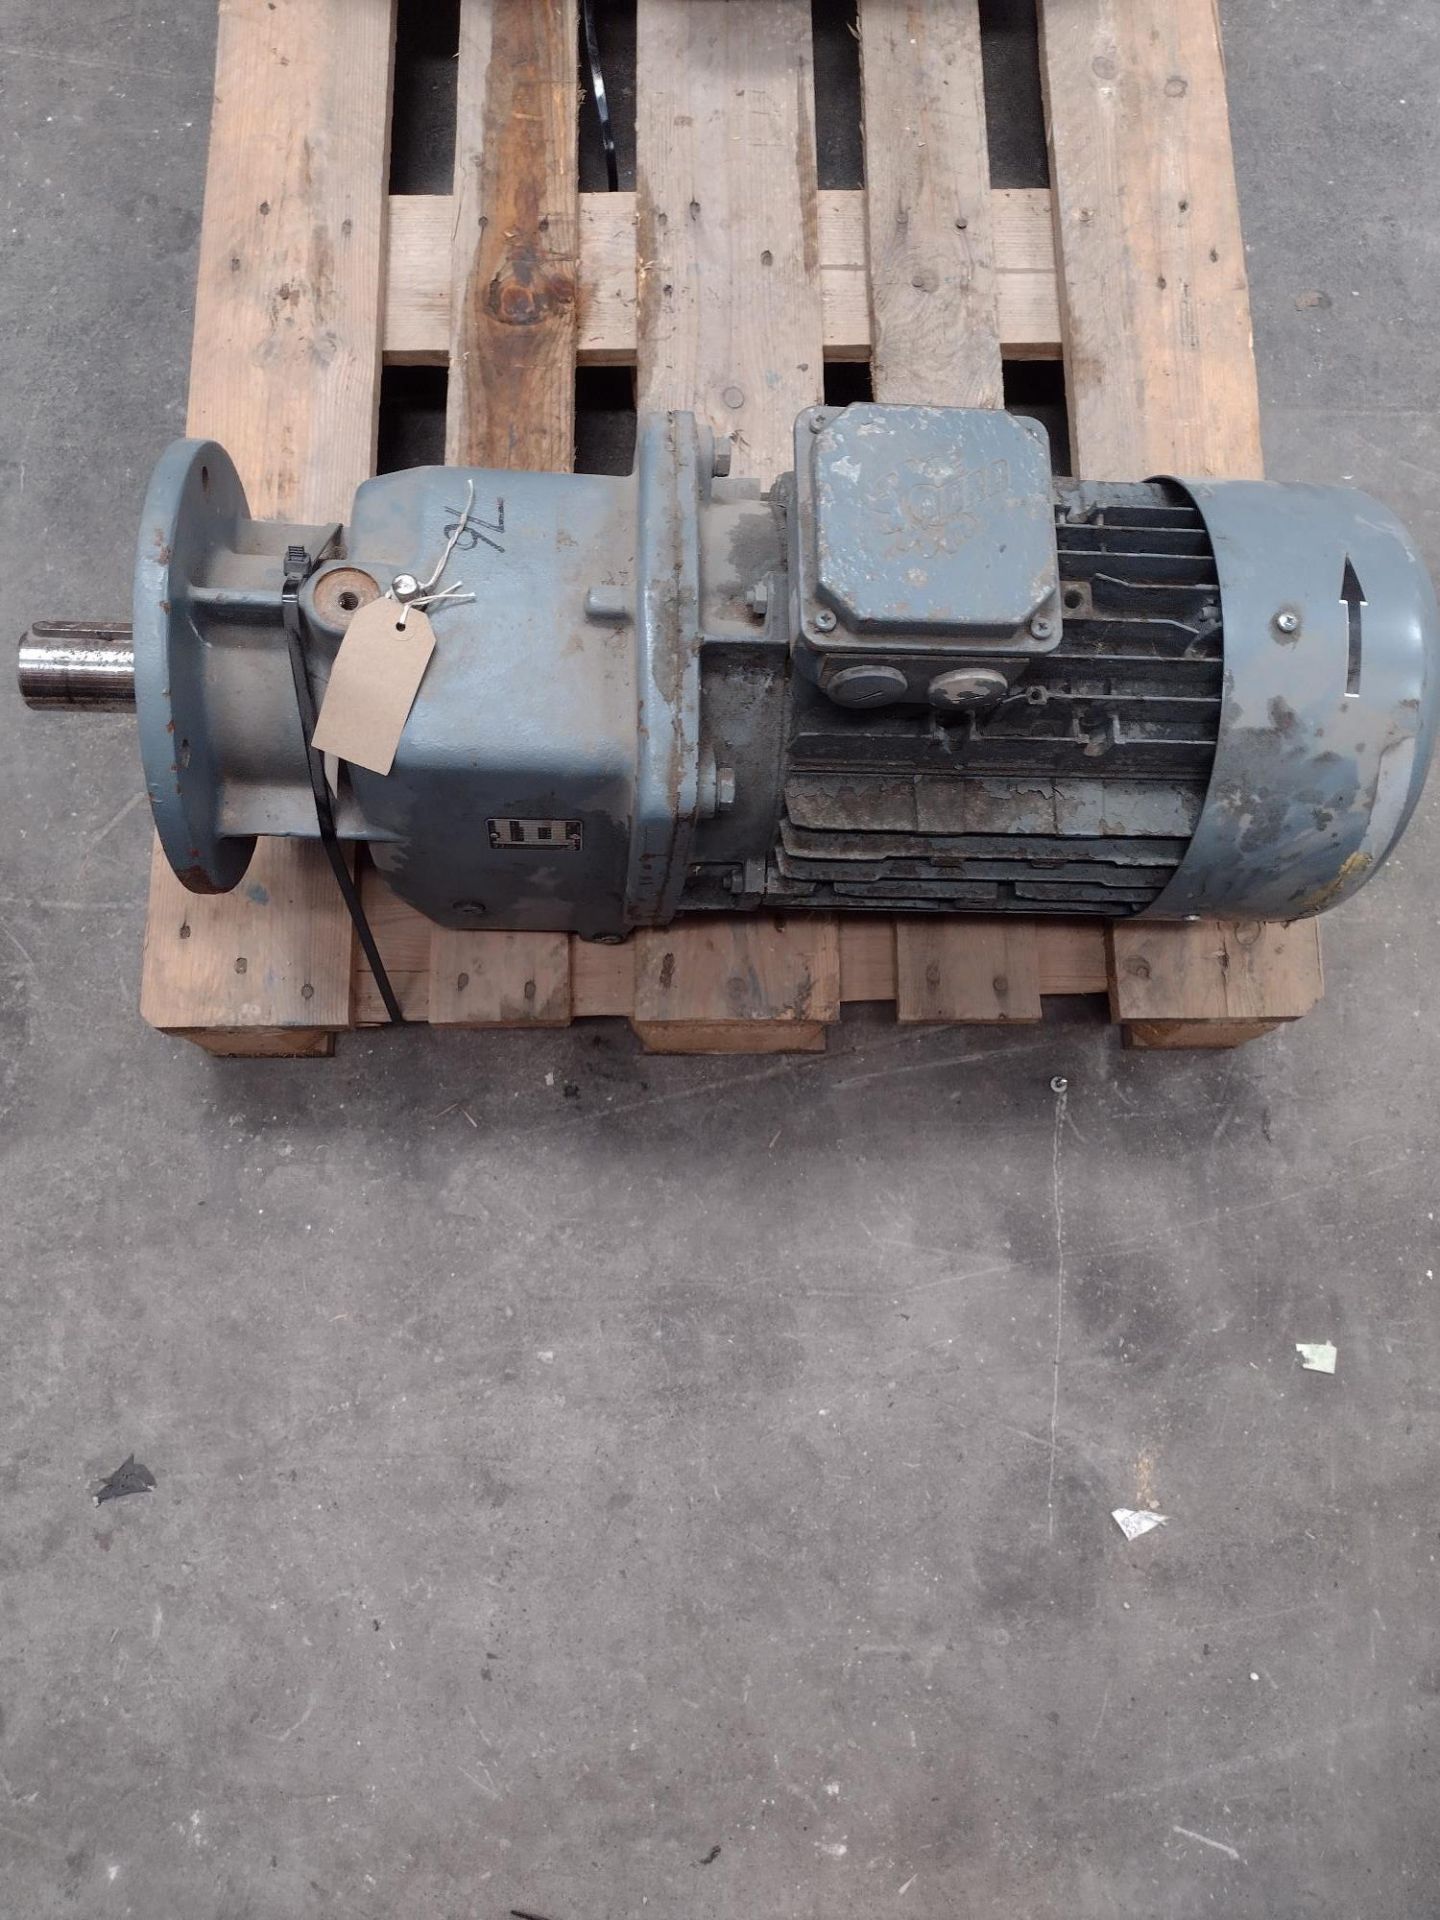 Nord SK132M/4 30 7.5kW Electric Motor, serial no. 36813766, with fitted gearbox. Lot located - Image 3 of 6